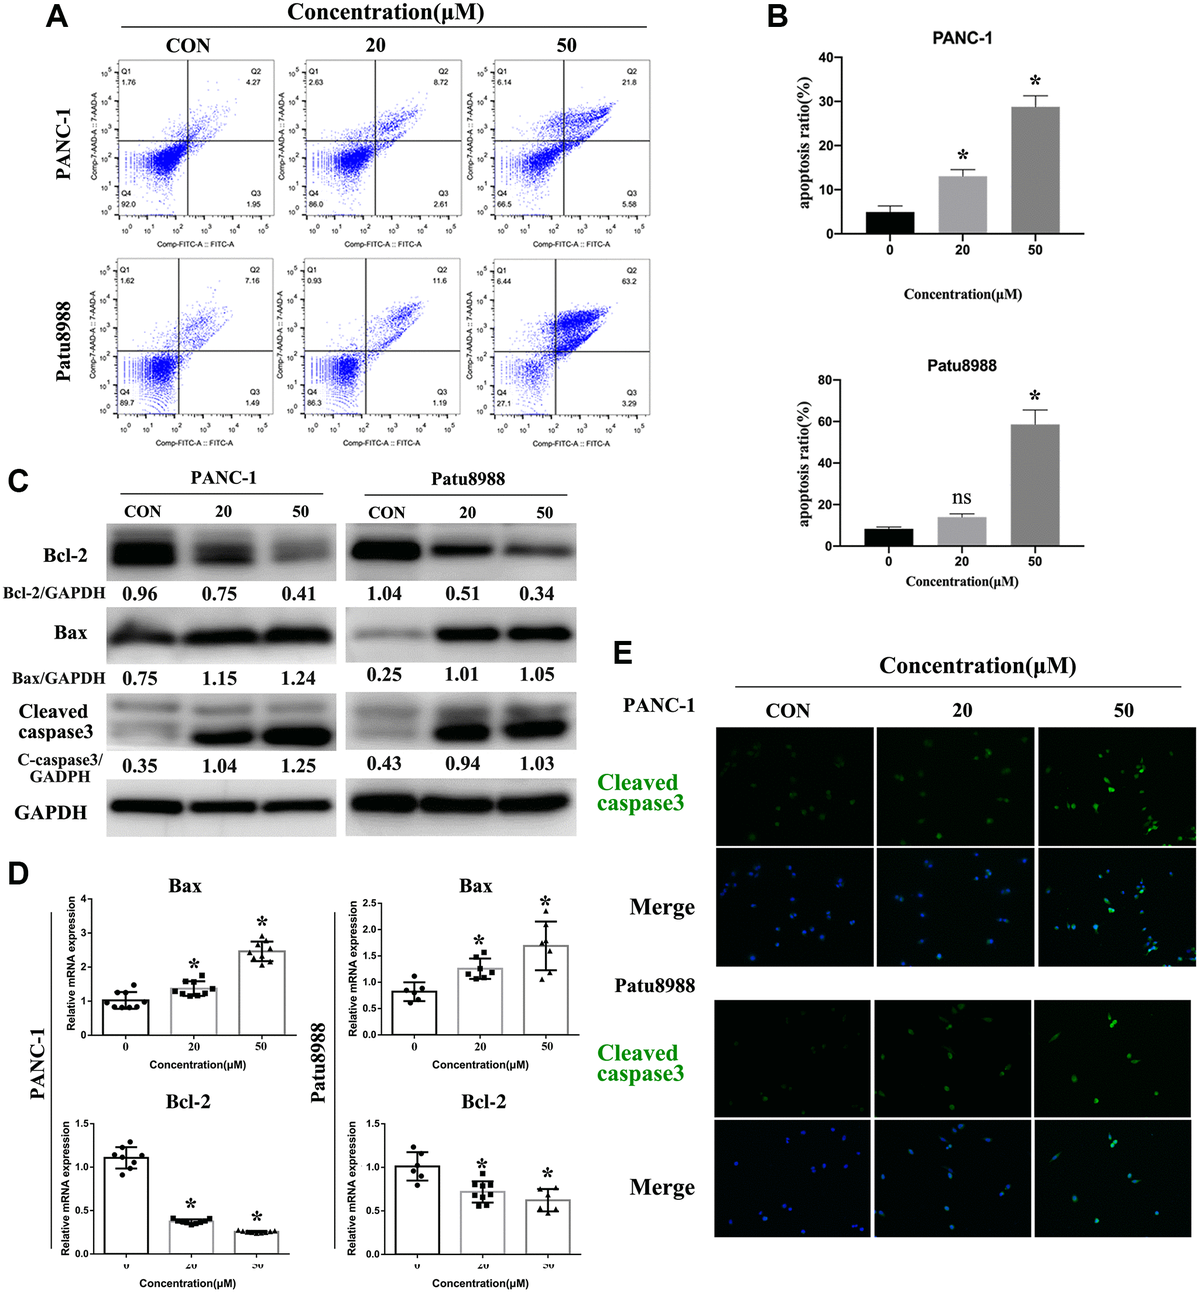 Panaxadiol induced apoptosis in PANC-1 and Patu8988 cells. (A–B) Flow cytometry of apoptosis demonstrated apoptosis ratio of pancreatic cancer cells was significantly increased after being incubated with different concentrations of panaxadiol, and apoptosis ratio = (Q2+Q3)/(Q1+Q2+Q3+Q4), *P C) The expression of apoptosis-related proteins (Bcl-2, Bax, Cleaved caspase3) were detected by western blot. The ratios of Bcl-2/Bax of PANC-1 were 1.29, 0.64, 0.32 as the concentration of panaxadiol increased gradually. For Patu8988, the ratios were 4.04, 0.51, 0.33 accordingly. (D) qRT-PCR confirmed the same results as western blot from the expression of gene level. (E) Cleaved caspase3 was up-regulated in PANC-1 and Patu8988 cells after being treated with panaxadiol by performing immunofluorescence staining.